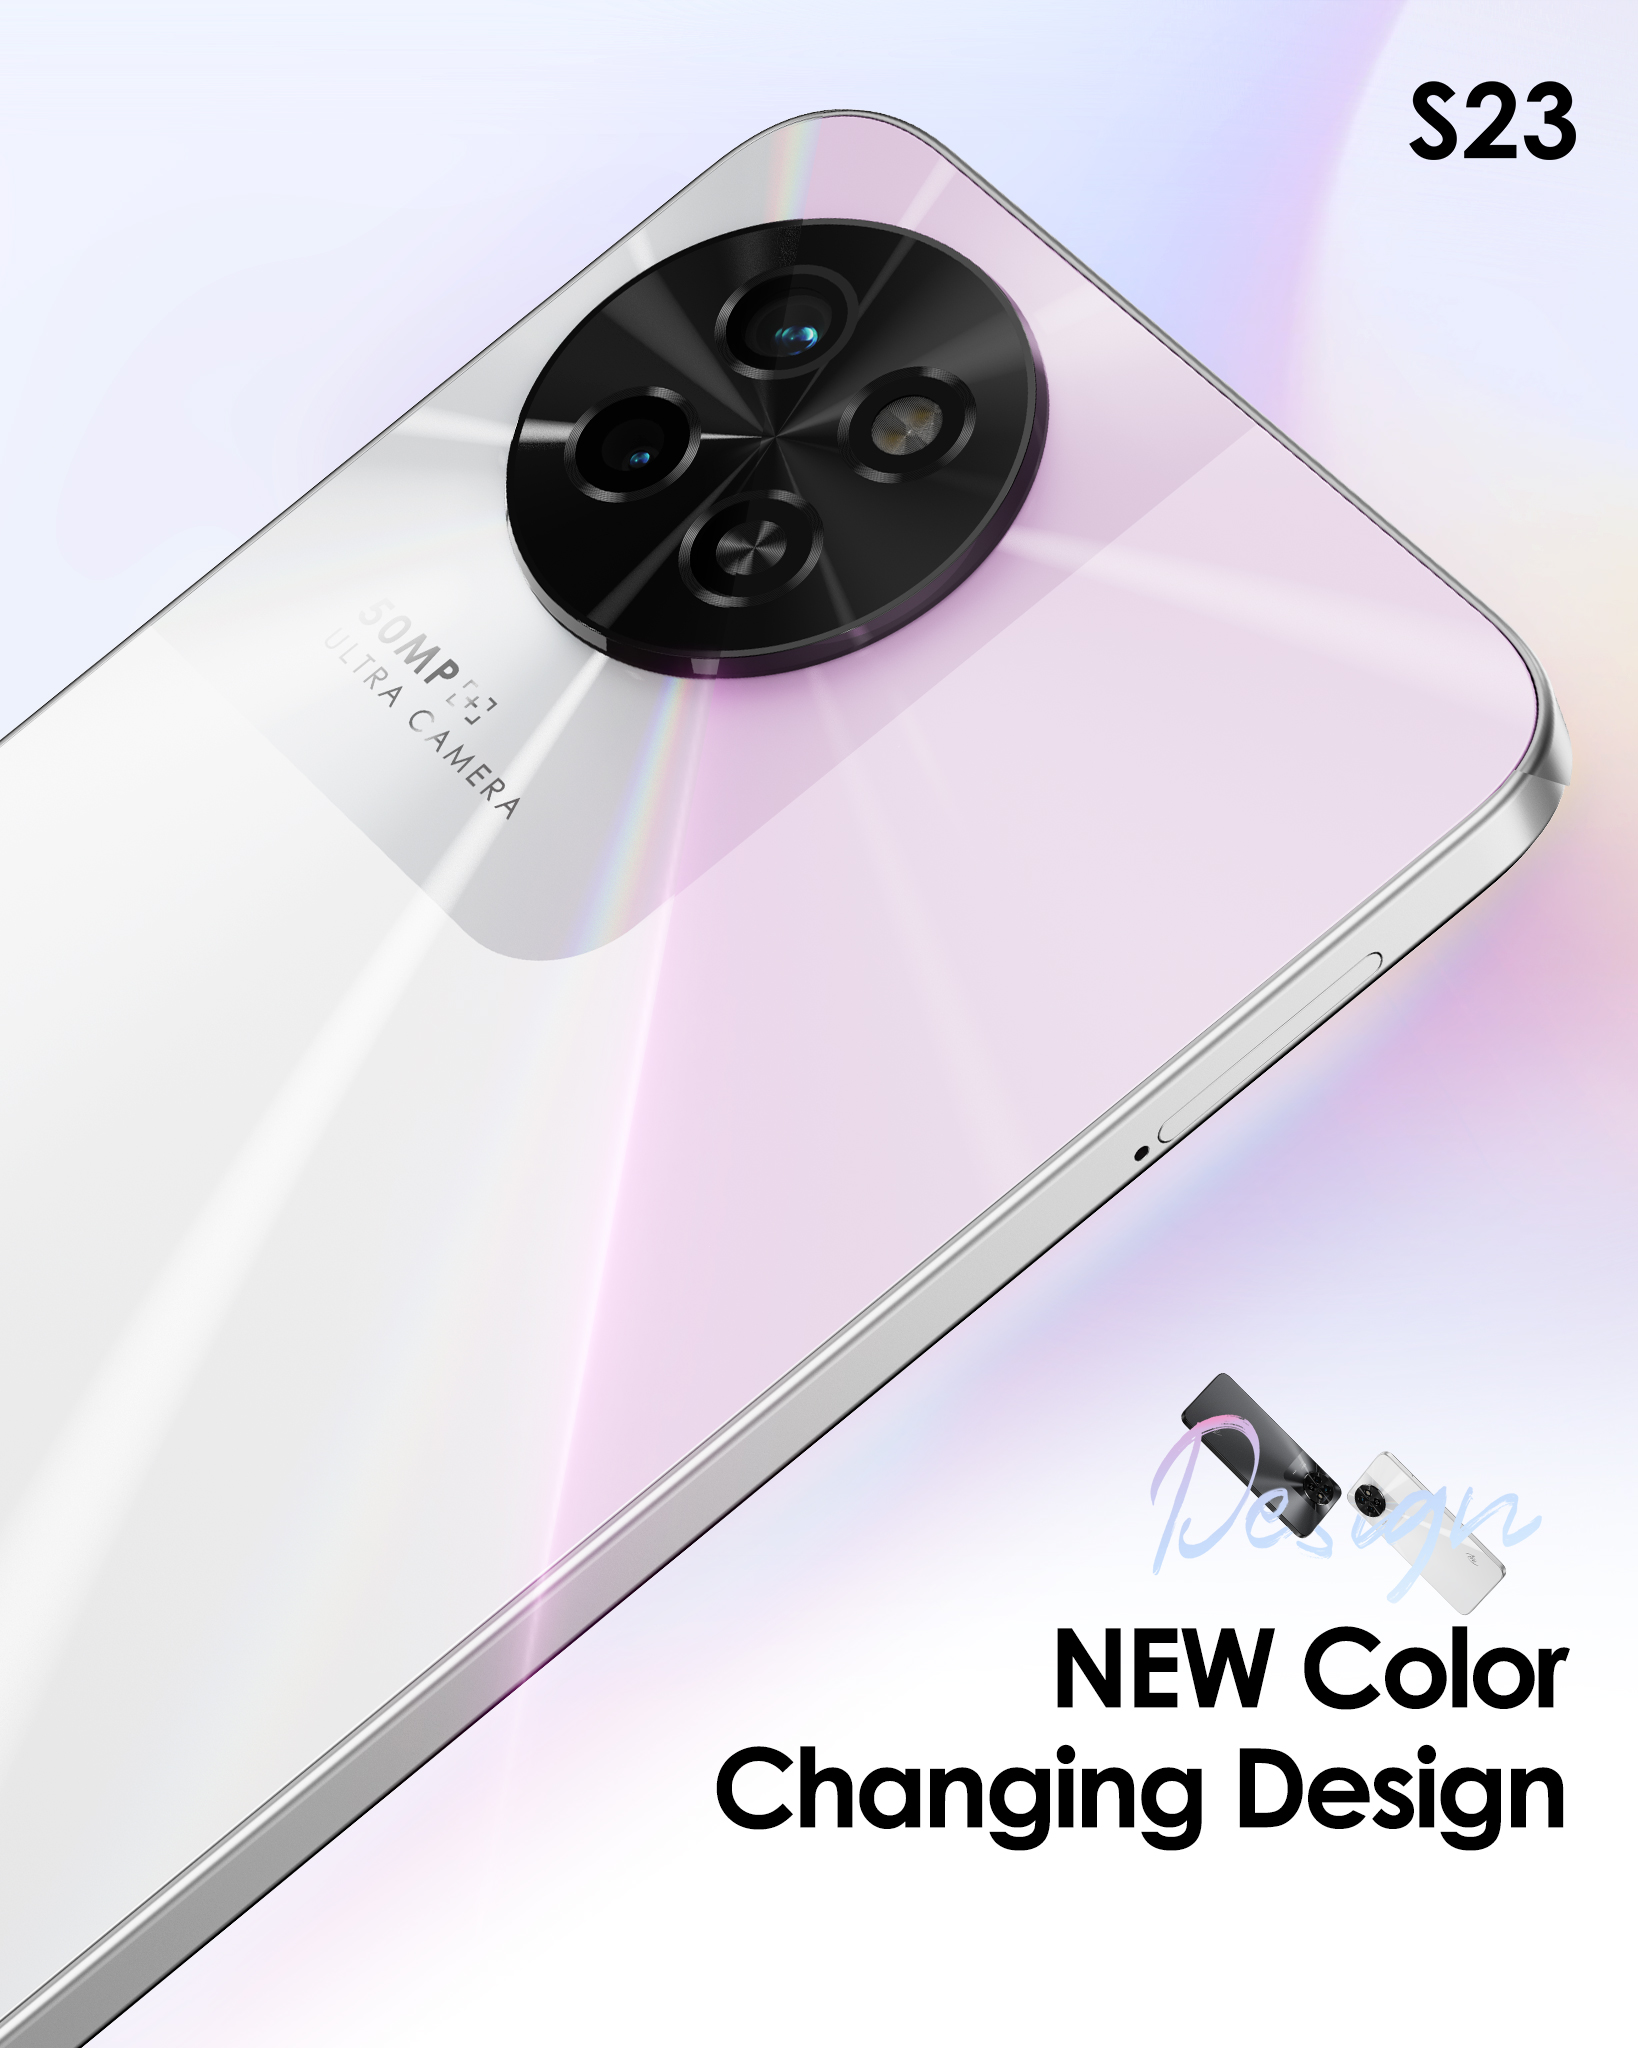 itel Launches Its first-Ever Color-Changing Smartphone S23 With Amazing Features